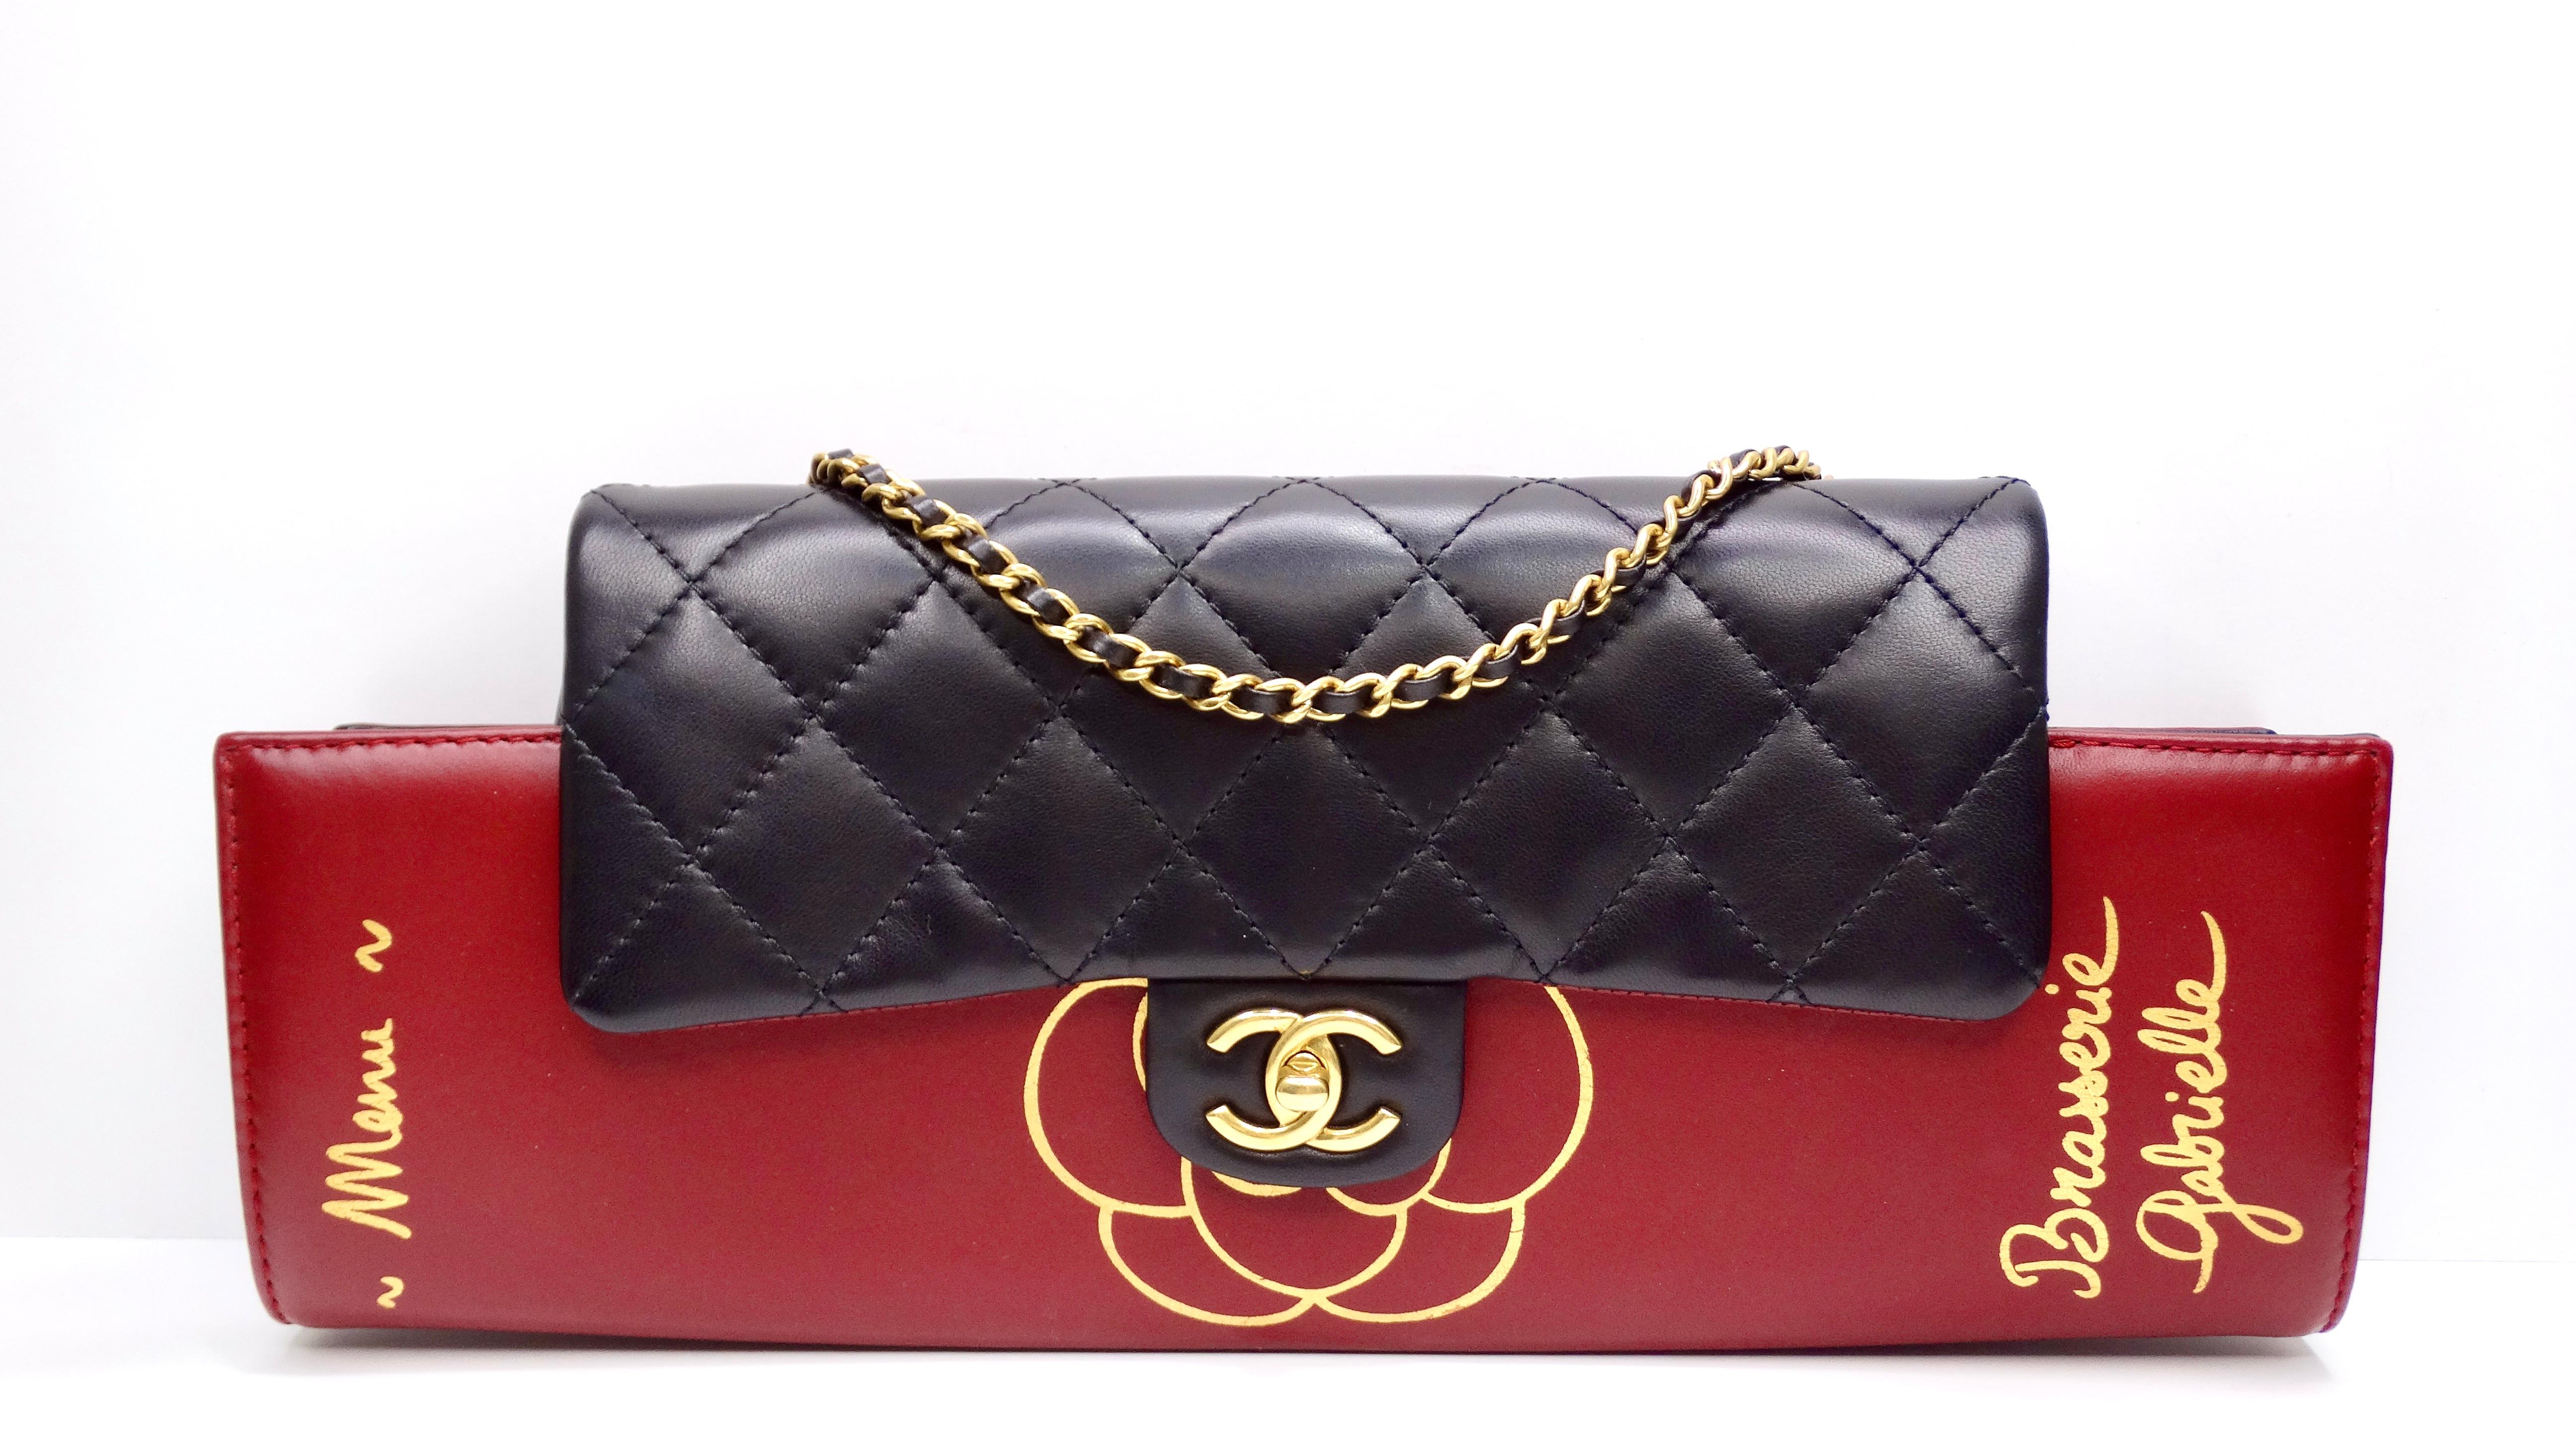 This bag speaks for itself. The rarity of this bag is exceptional and is a collectors piece. Chanel pays tribute to its founder with this Brasserie Gabrielle shoulder bag. Crafted in two of the designer’s favourite colours - black and red - it has